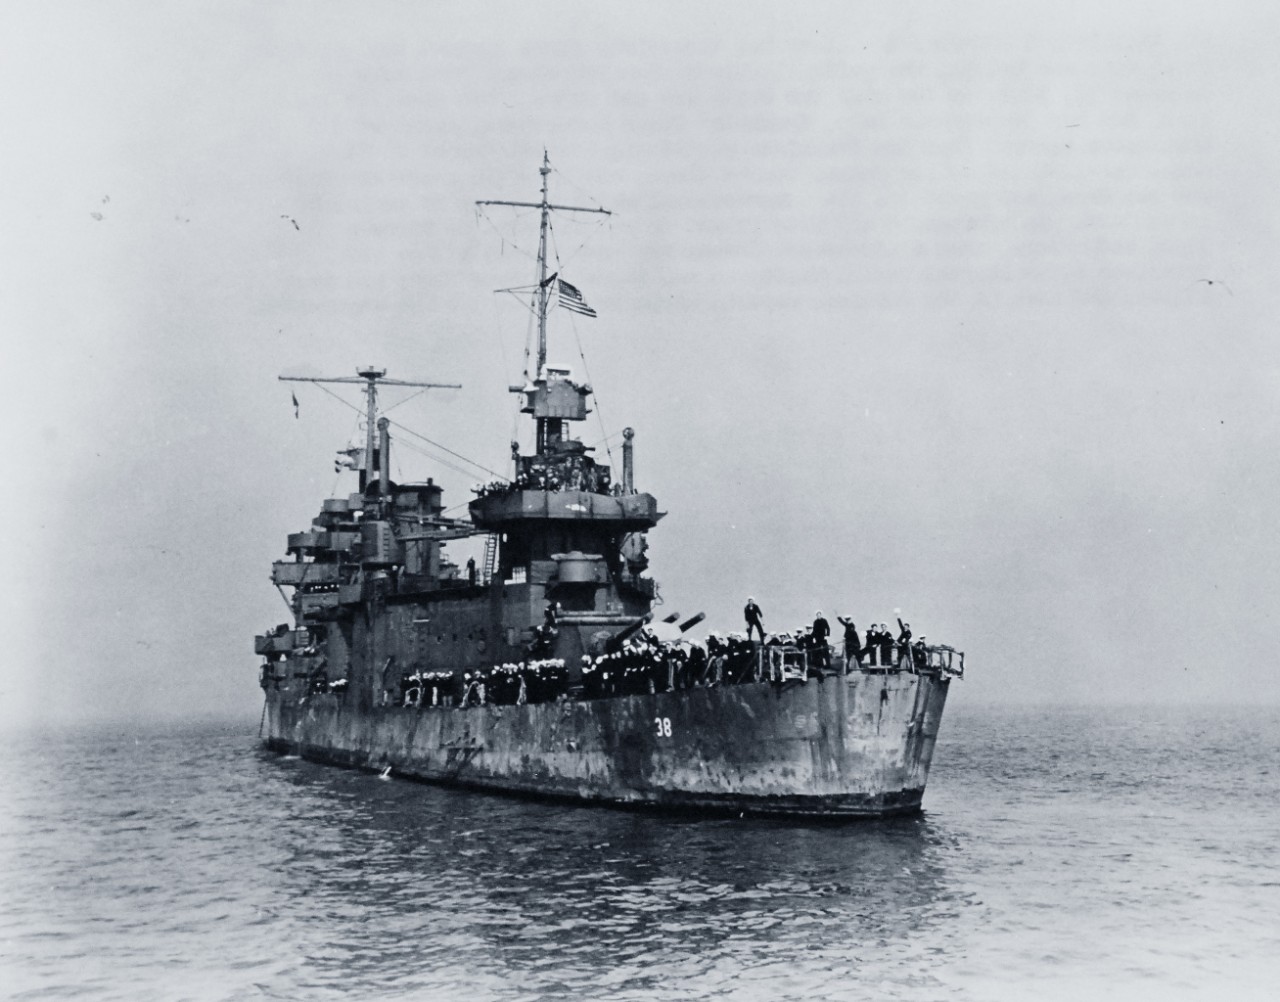 80-G-40250: USS San Francisco (CA 38) shown after her fight against the Japanese in the epic sea battle, Naval Battle of Guadalcanal, November 12-15, 1942. She arrived in her namesake city for repairs on December 12, 1942. She was en route to the...